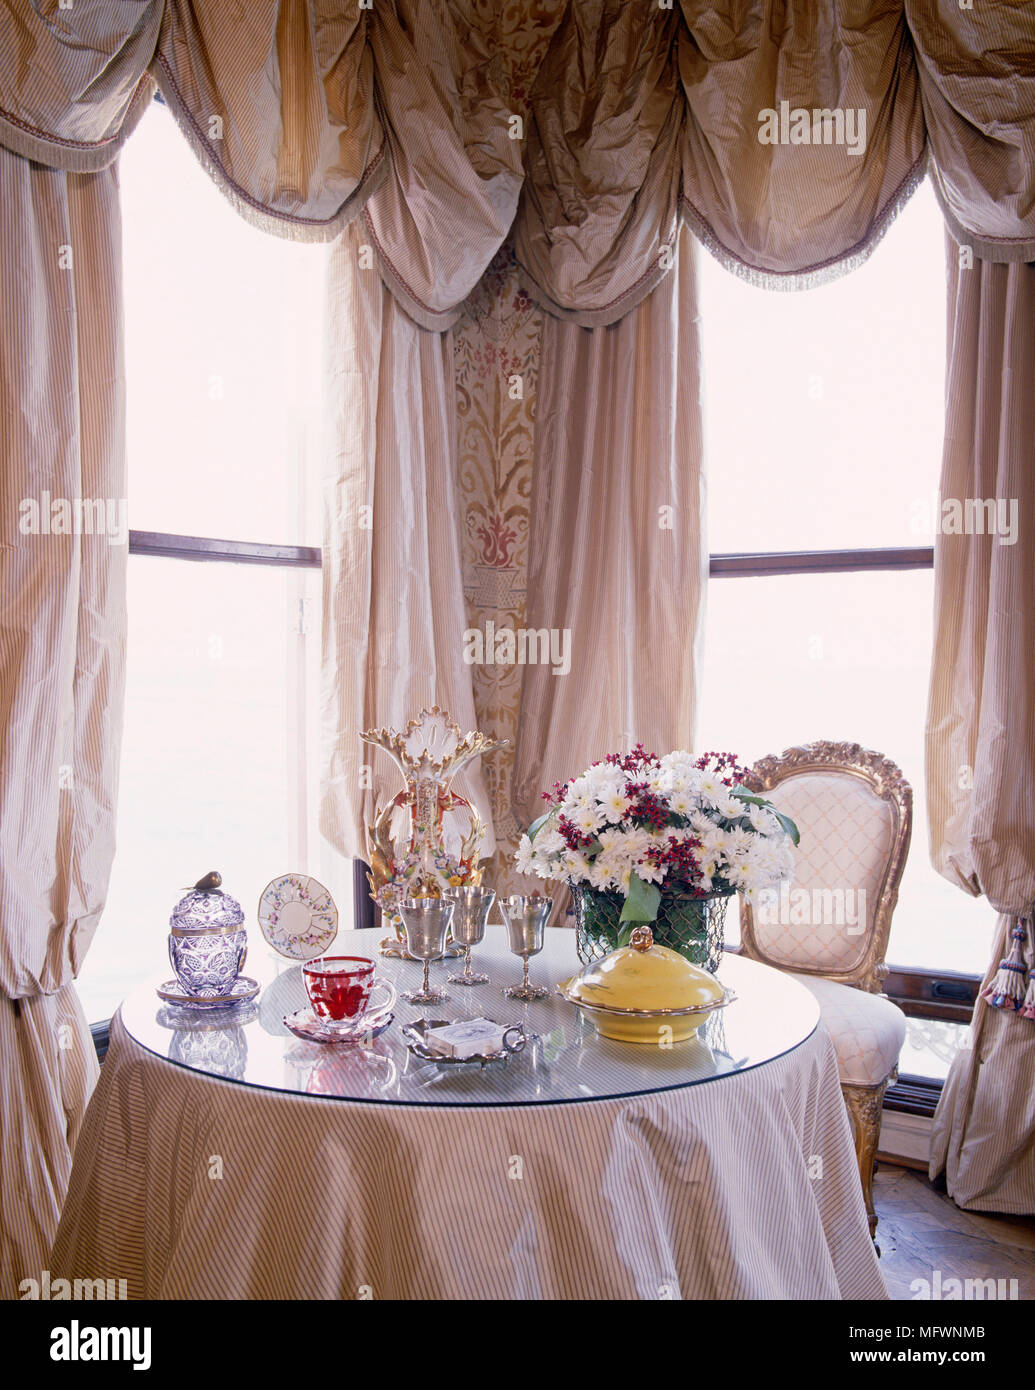 Round table with glass top in bay window dressed with swag curtains Stock Photo